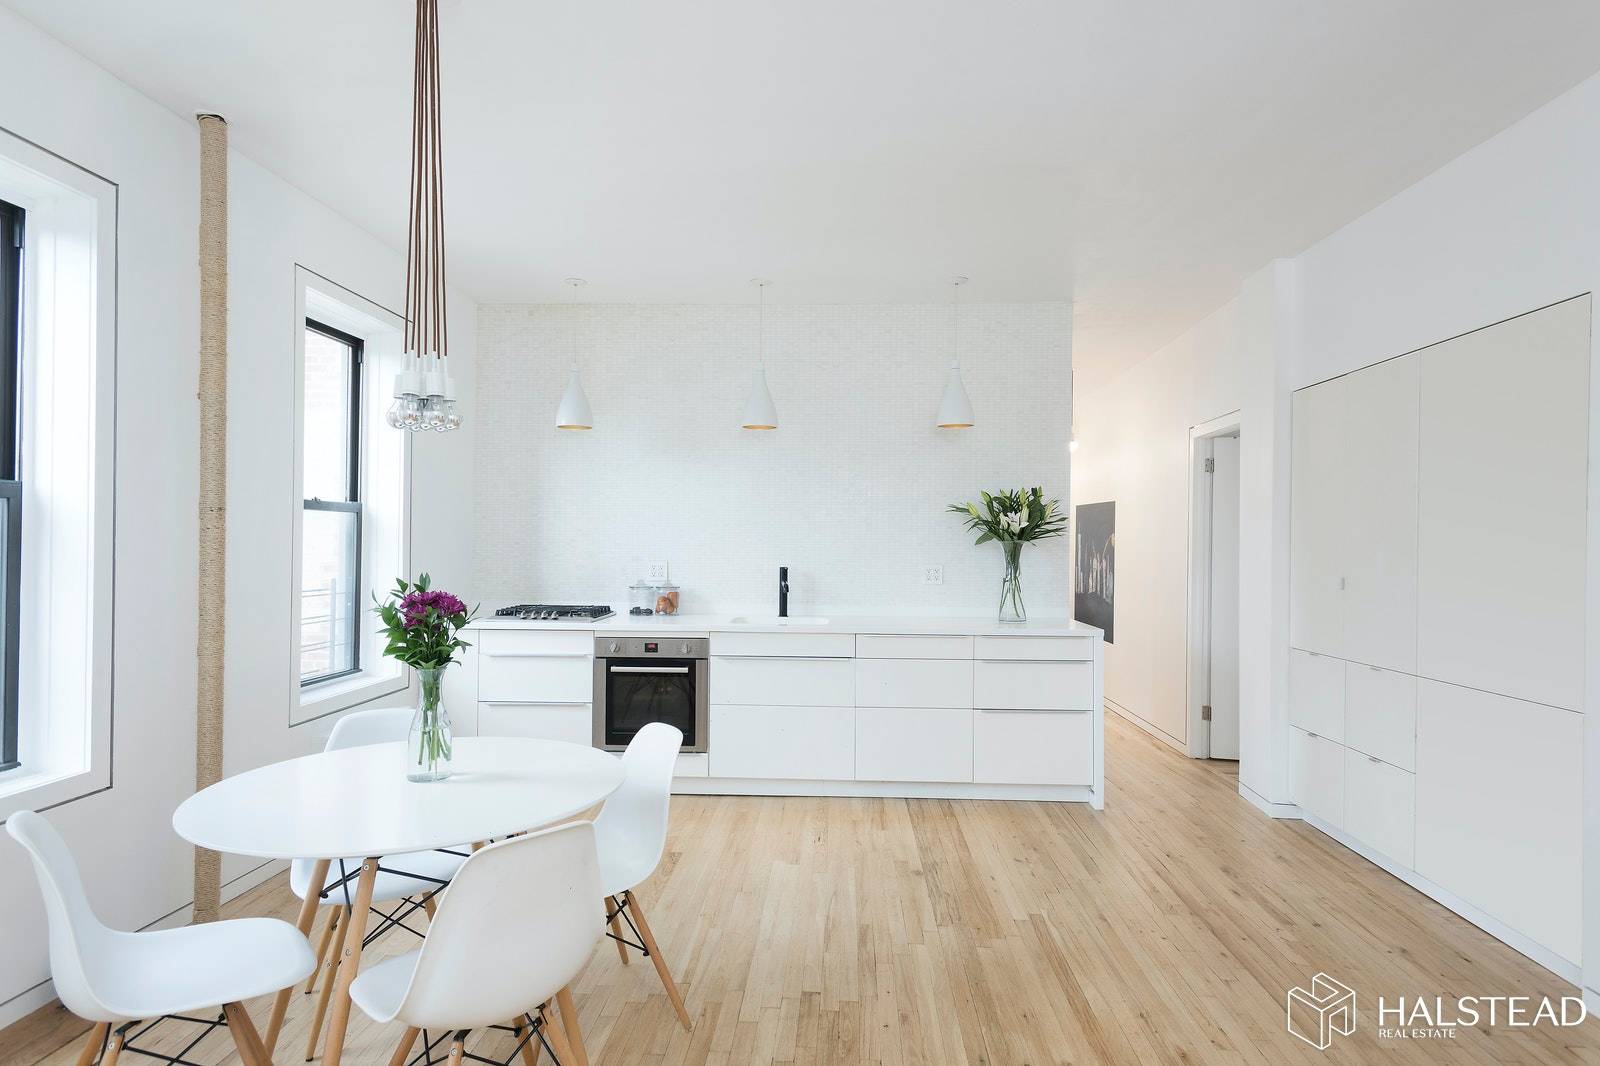 Exceptional three bedroom, turnkey, home on the border of Prospect Heights and Crown Heights with on site parking currently available for 150 mo.